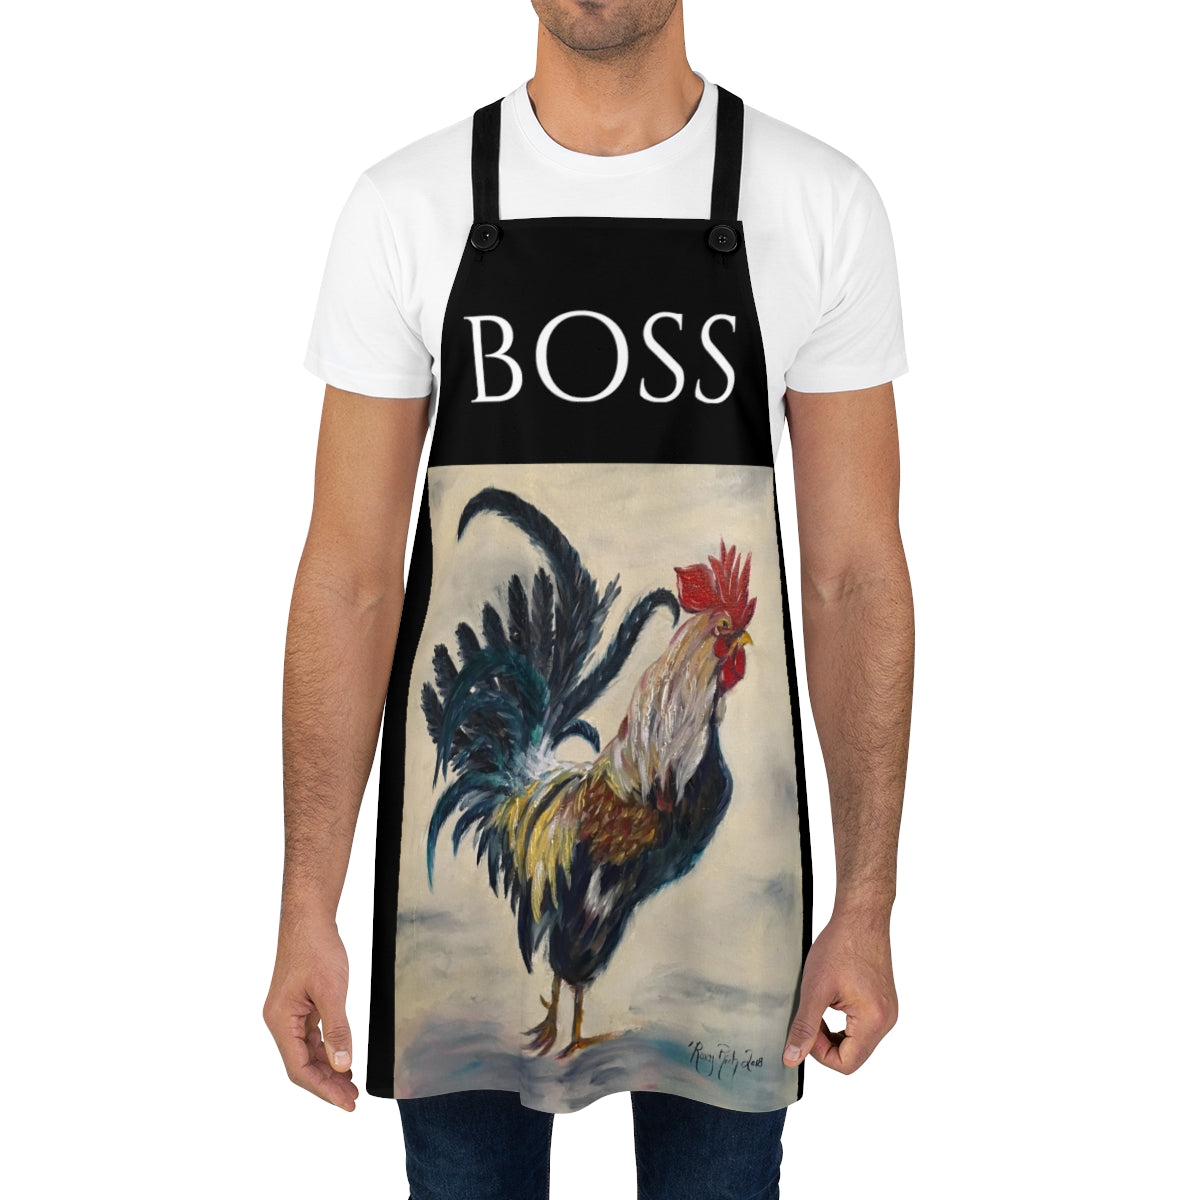 Orignal Rooster Painting printed on a Black Apron Kitchen Cooking accessory with Original Art